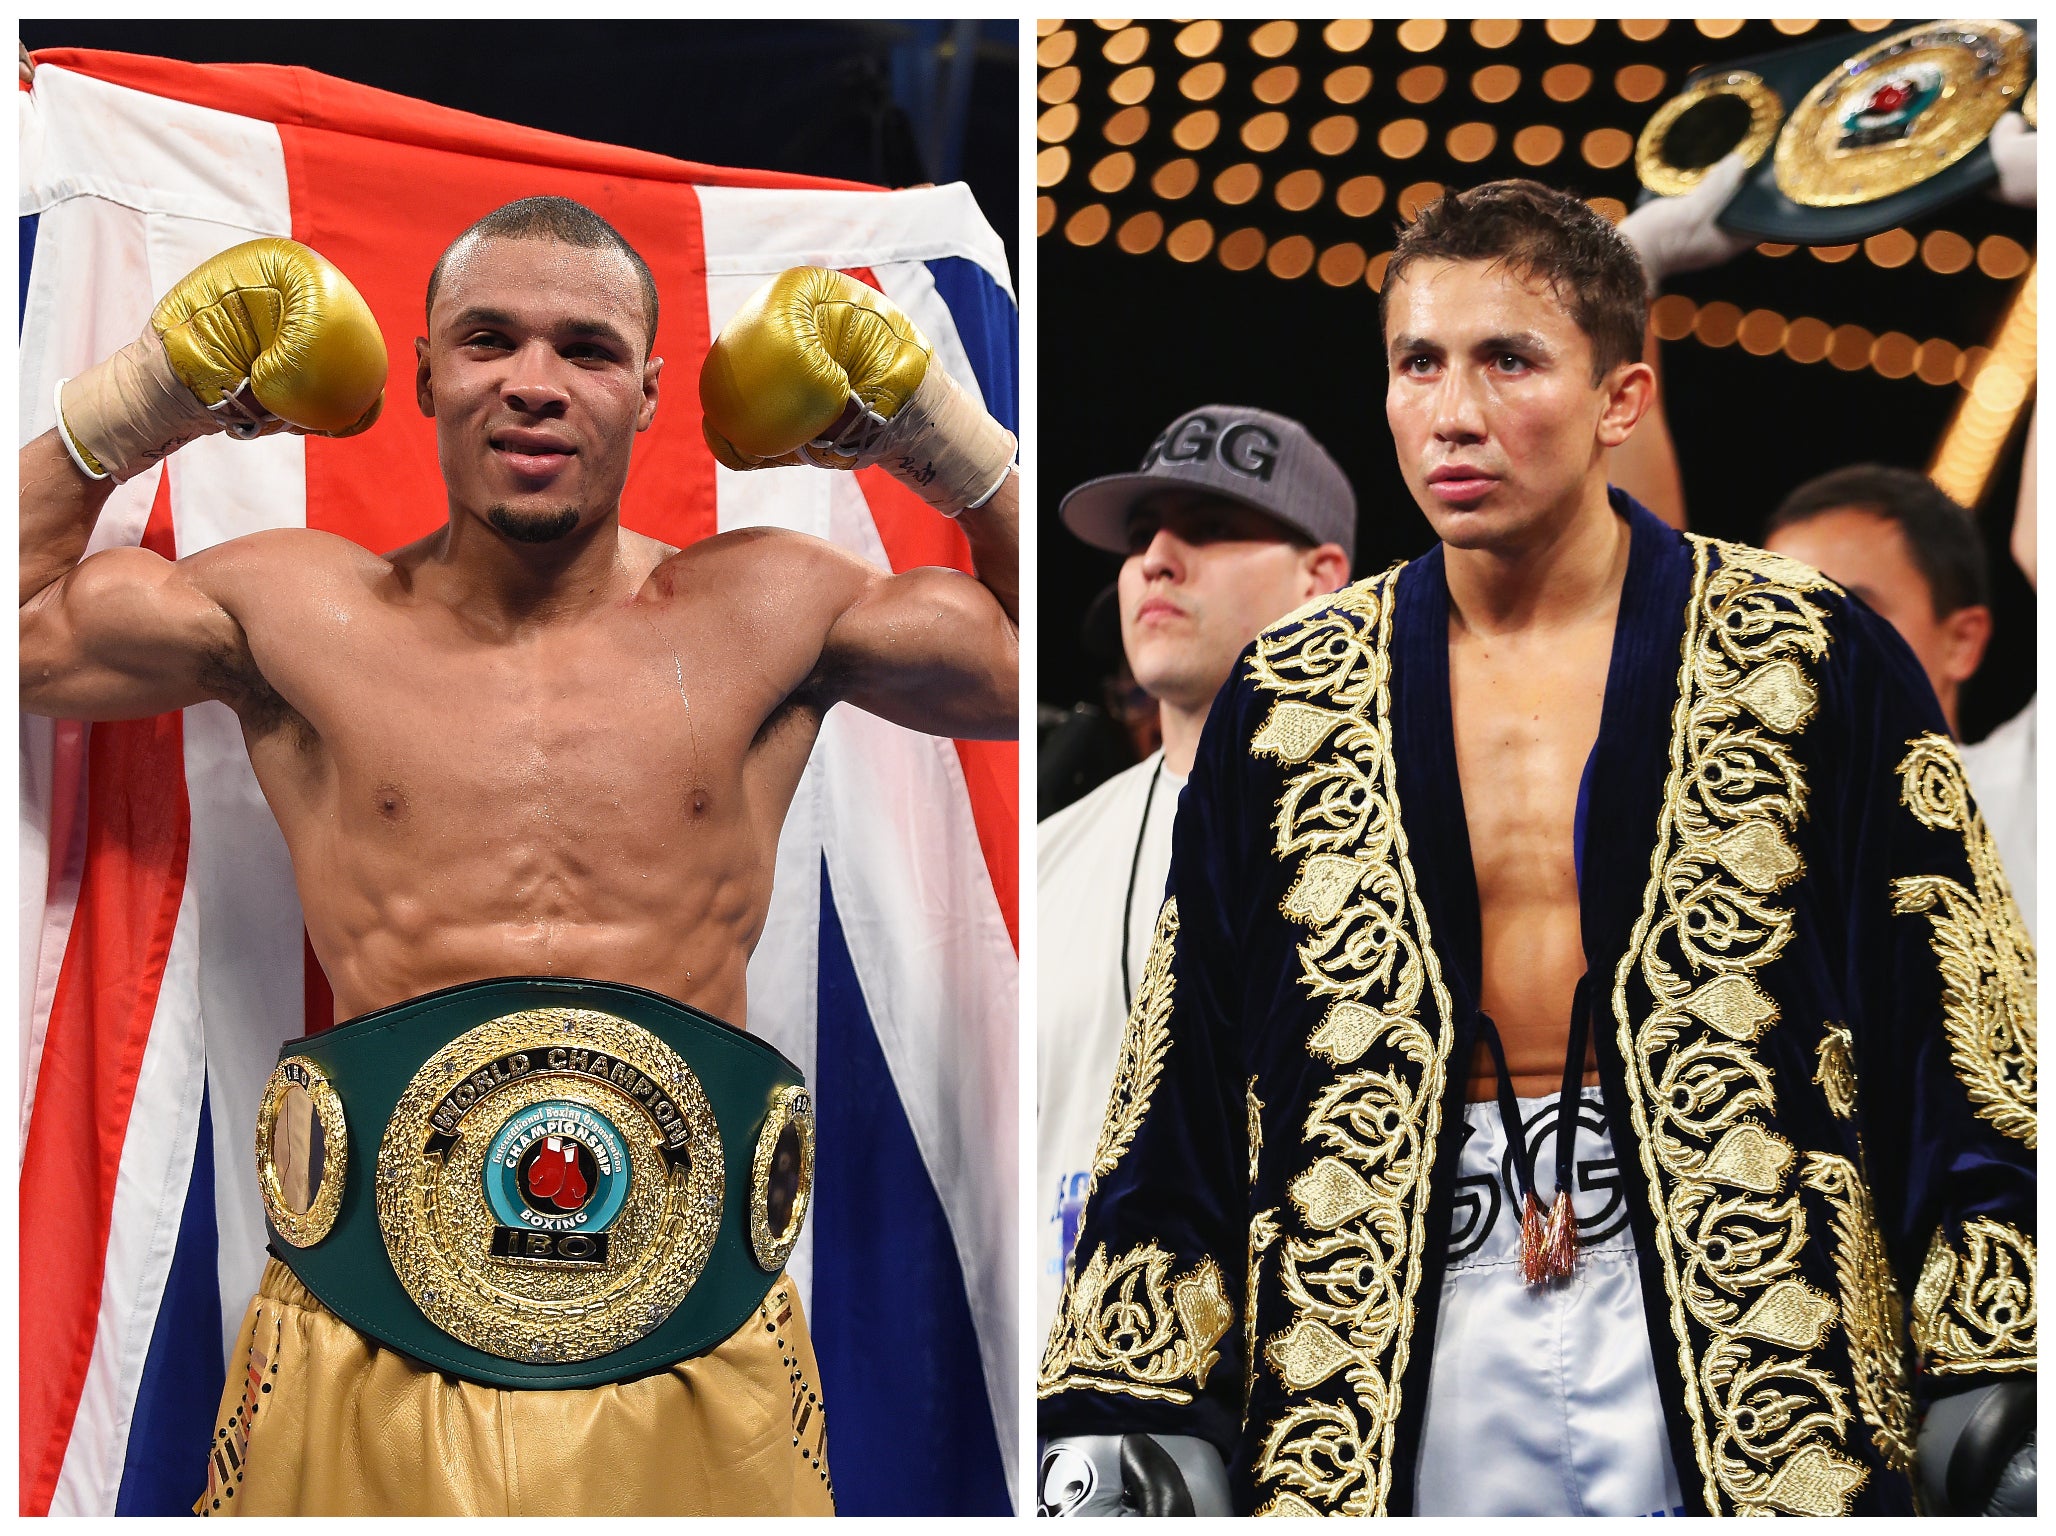 Eubank Jr. wants to challenge for Golovkin's titles